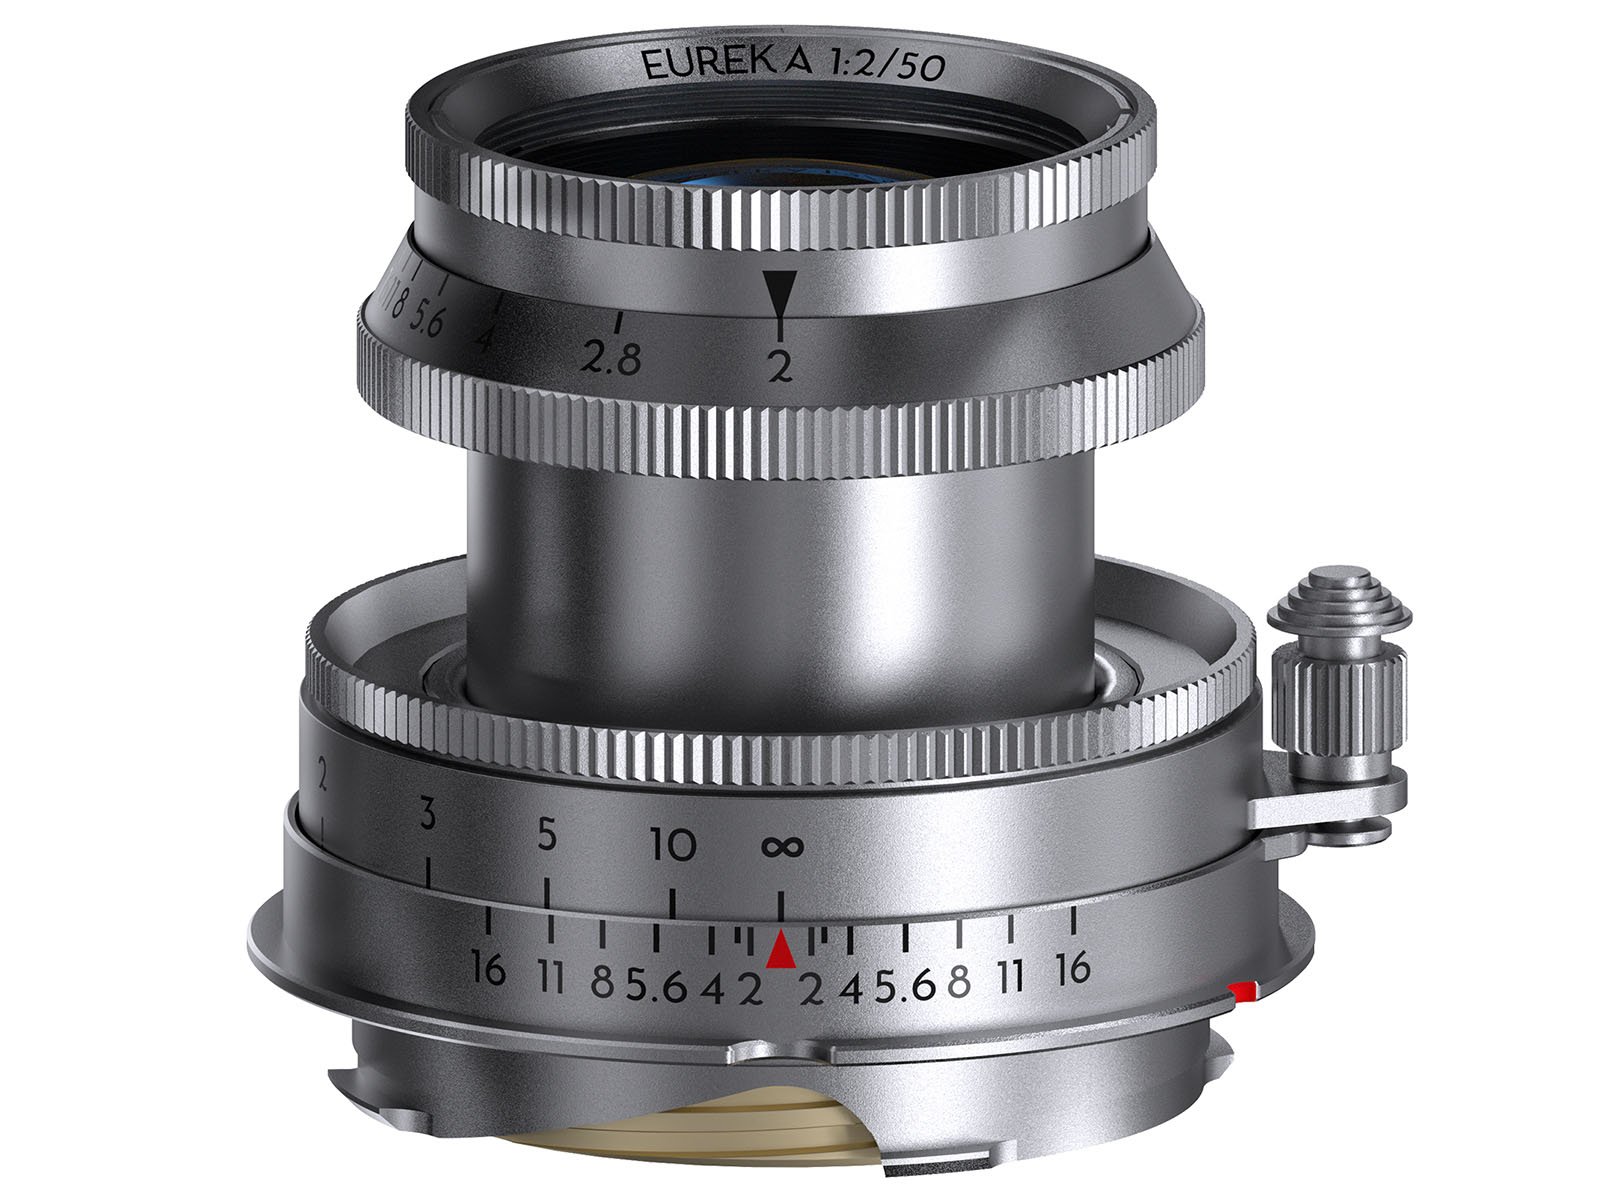 A silver camera lens labeled "EUREKA 1:2/50" with various engraved markings including aperture and focus scales. The lens features ridged focus and aperture rings, a distance scale in feet, and mounted on a metallic base compatible with a camera.